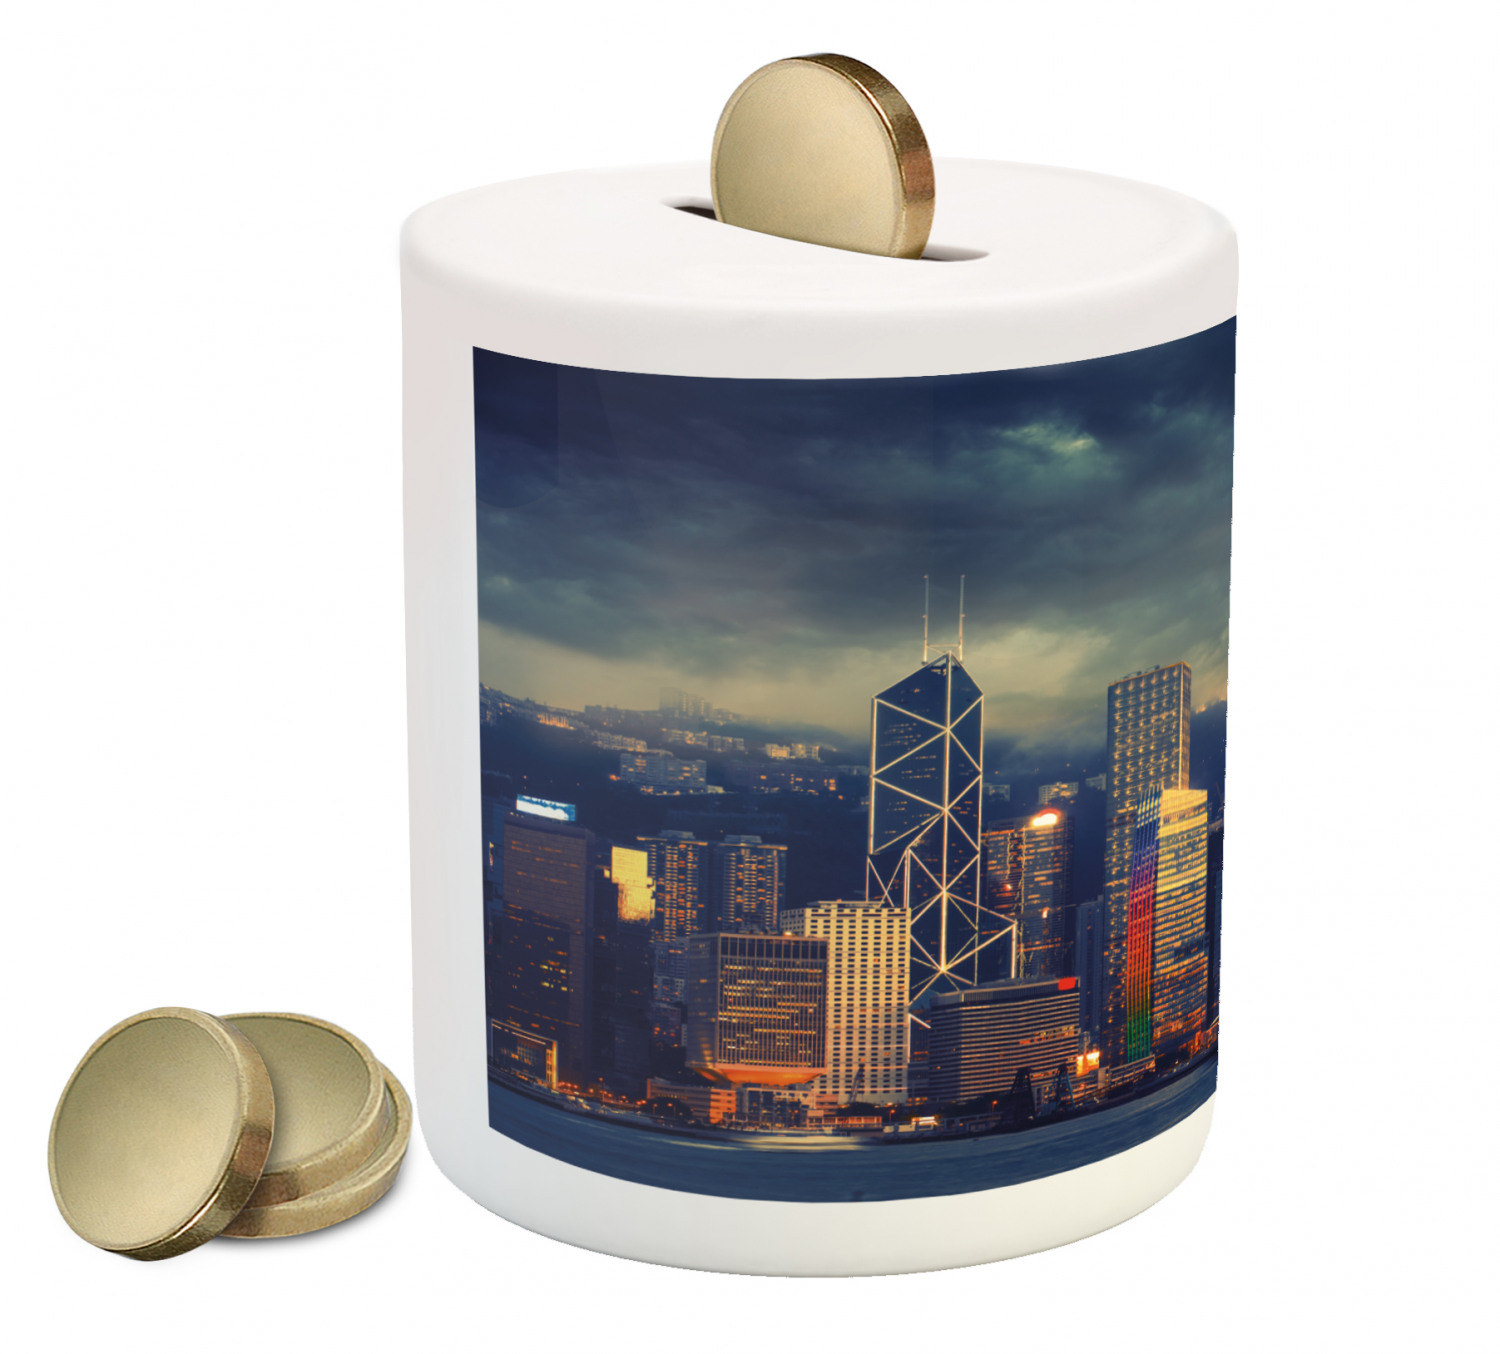 Cityscape Piggy Bank, Hong Kong Cityscape Stormy Weather Dark Cloudy Sky Waterfront Port Dramatic View, Ceramic Coin Bank Money Box for Cash Saving, 3.6" X 3.2", Multicolor, by Ambesonne - image 2 of 4